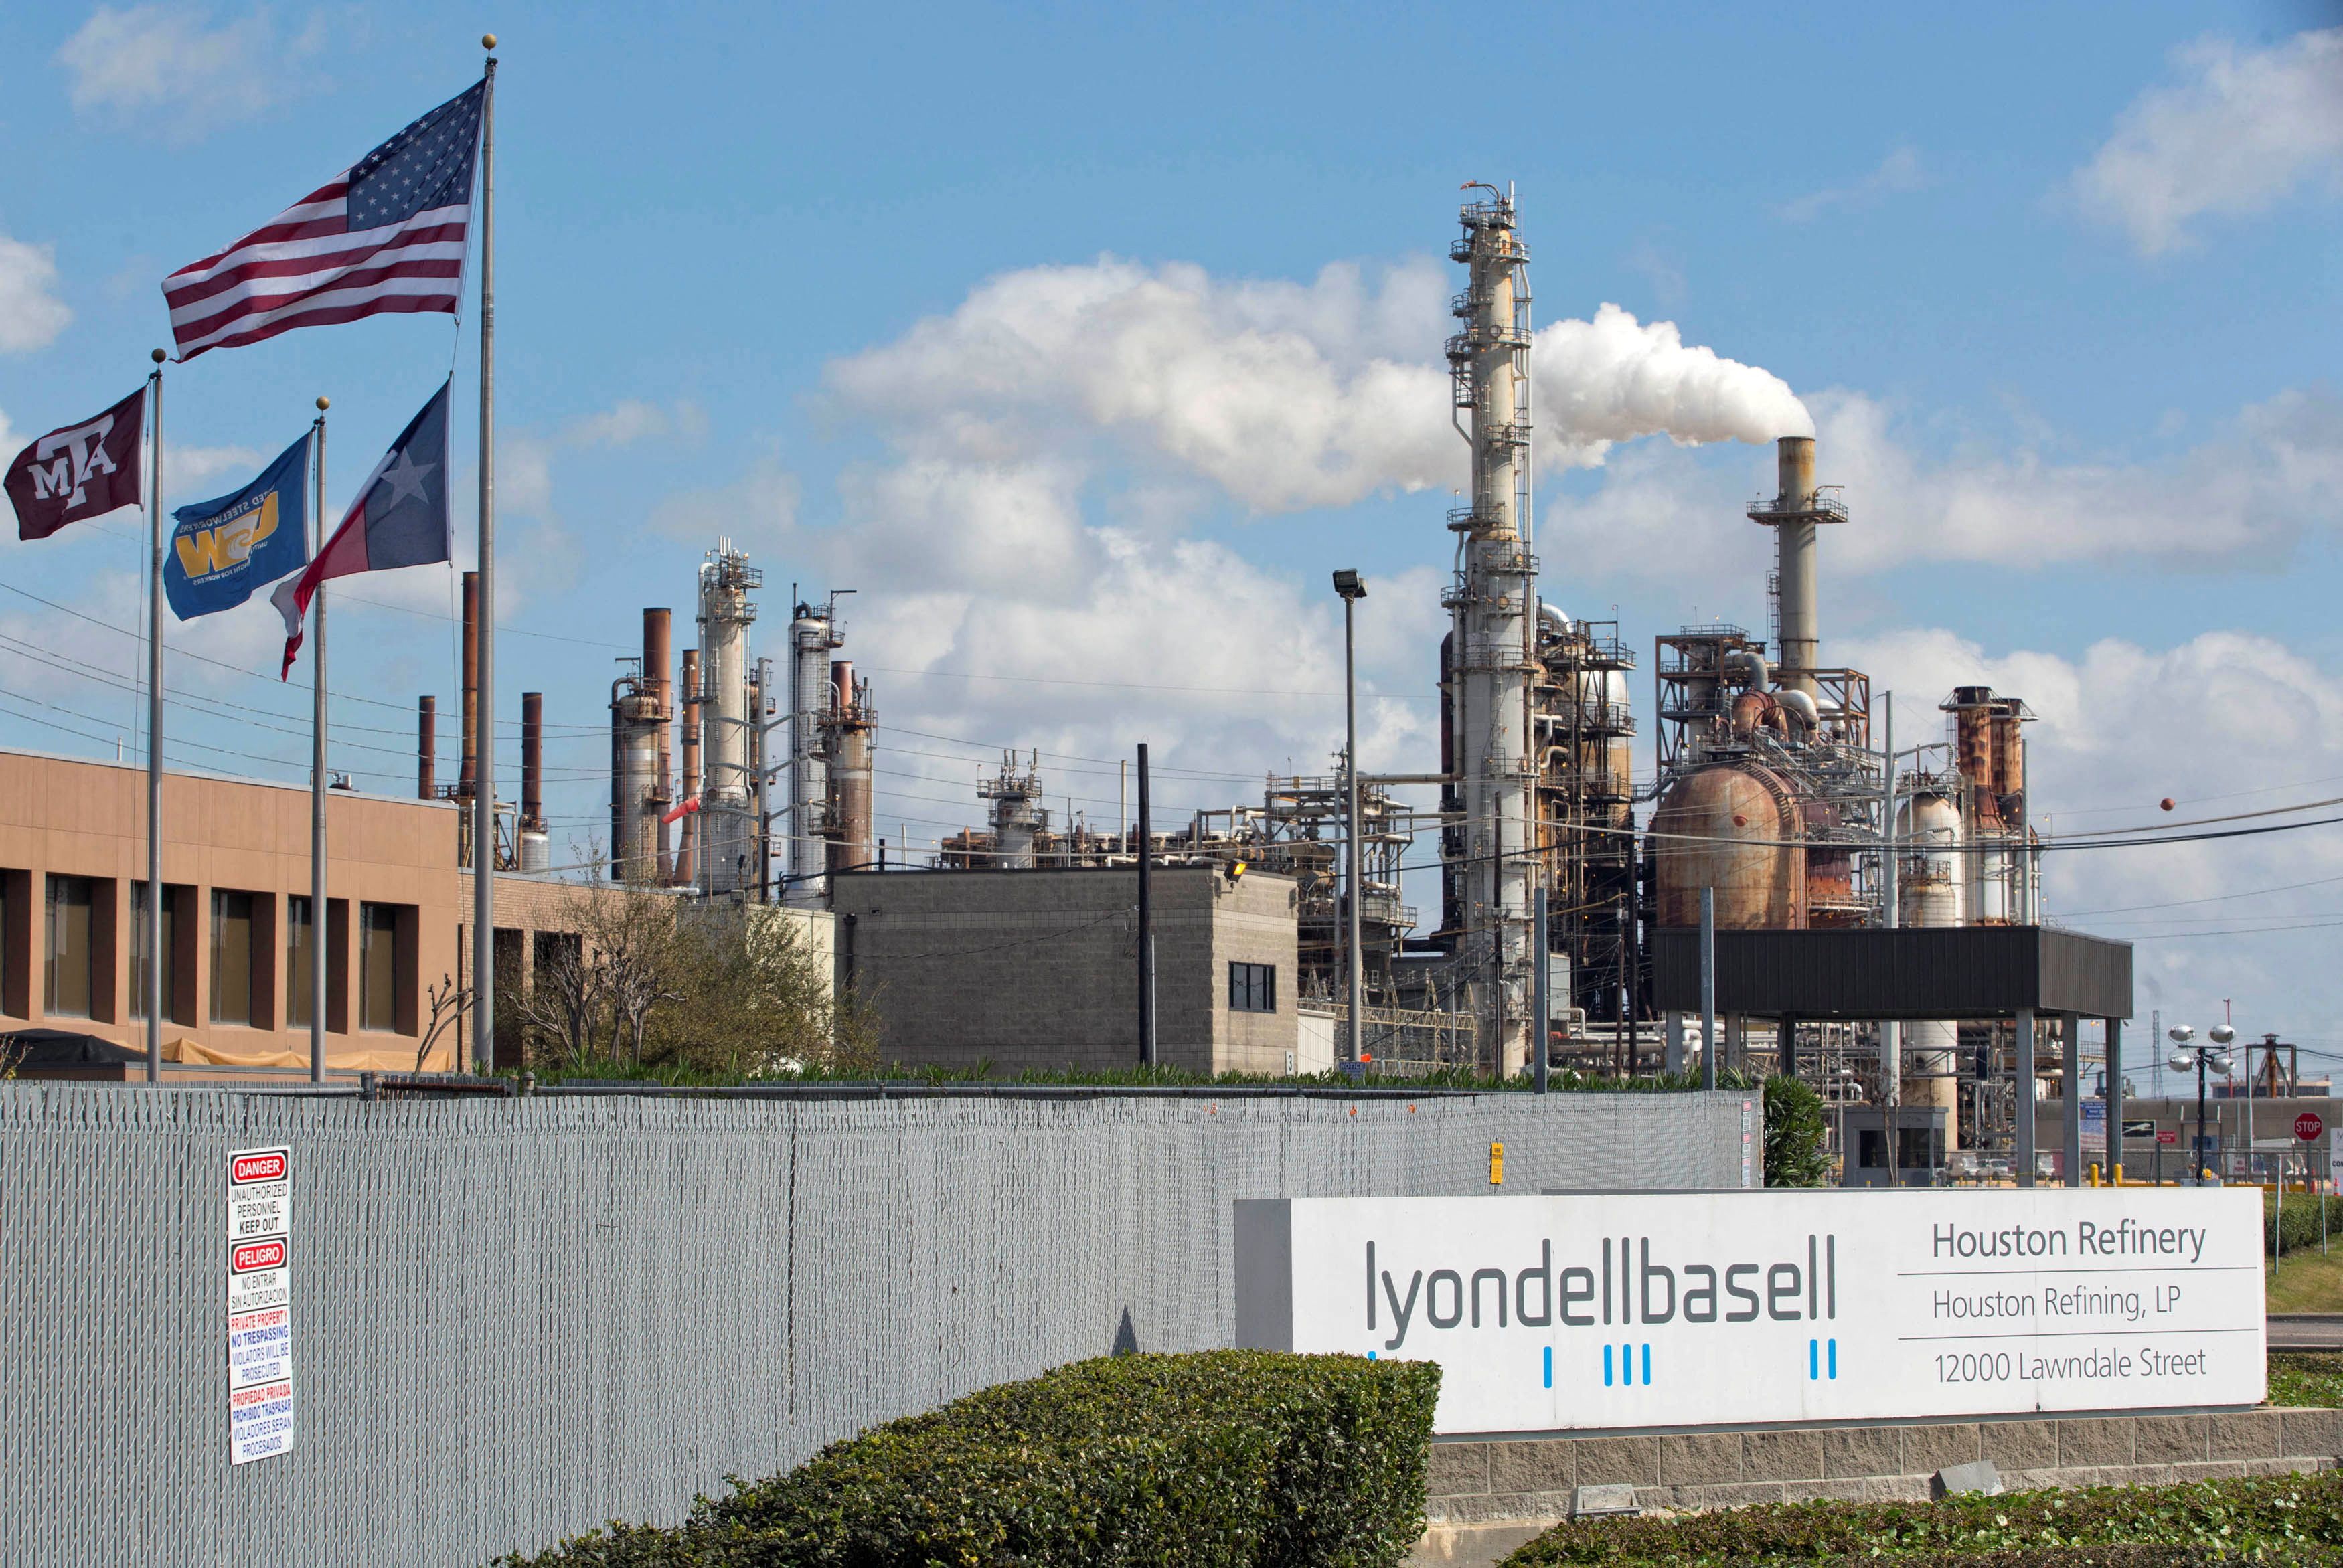 A general view of the Lyondell-Basell refinery in Houston